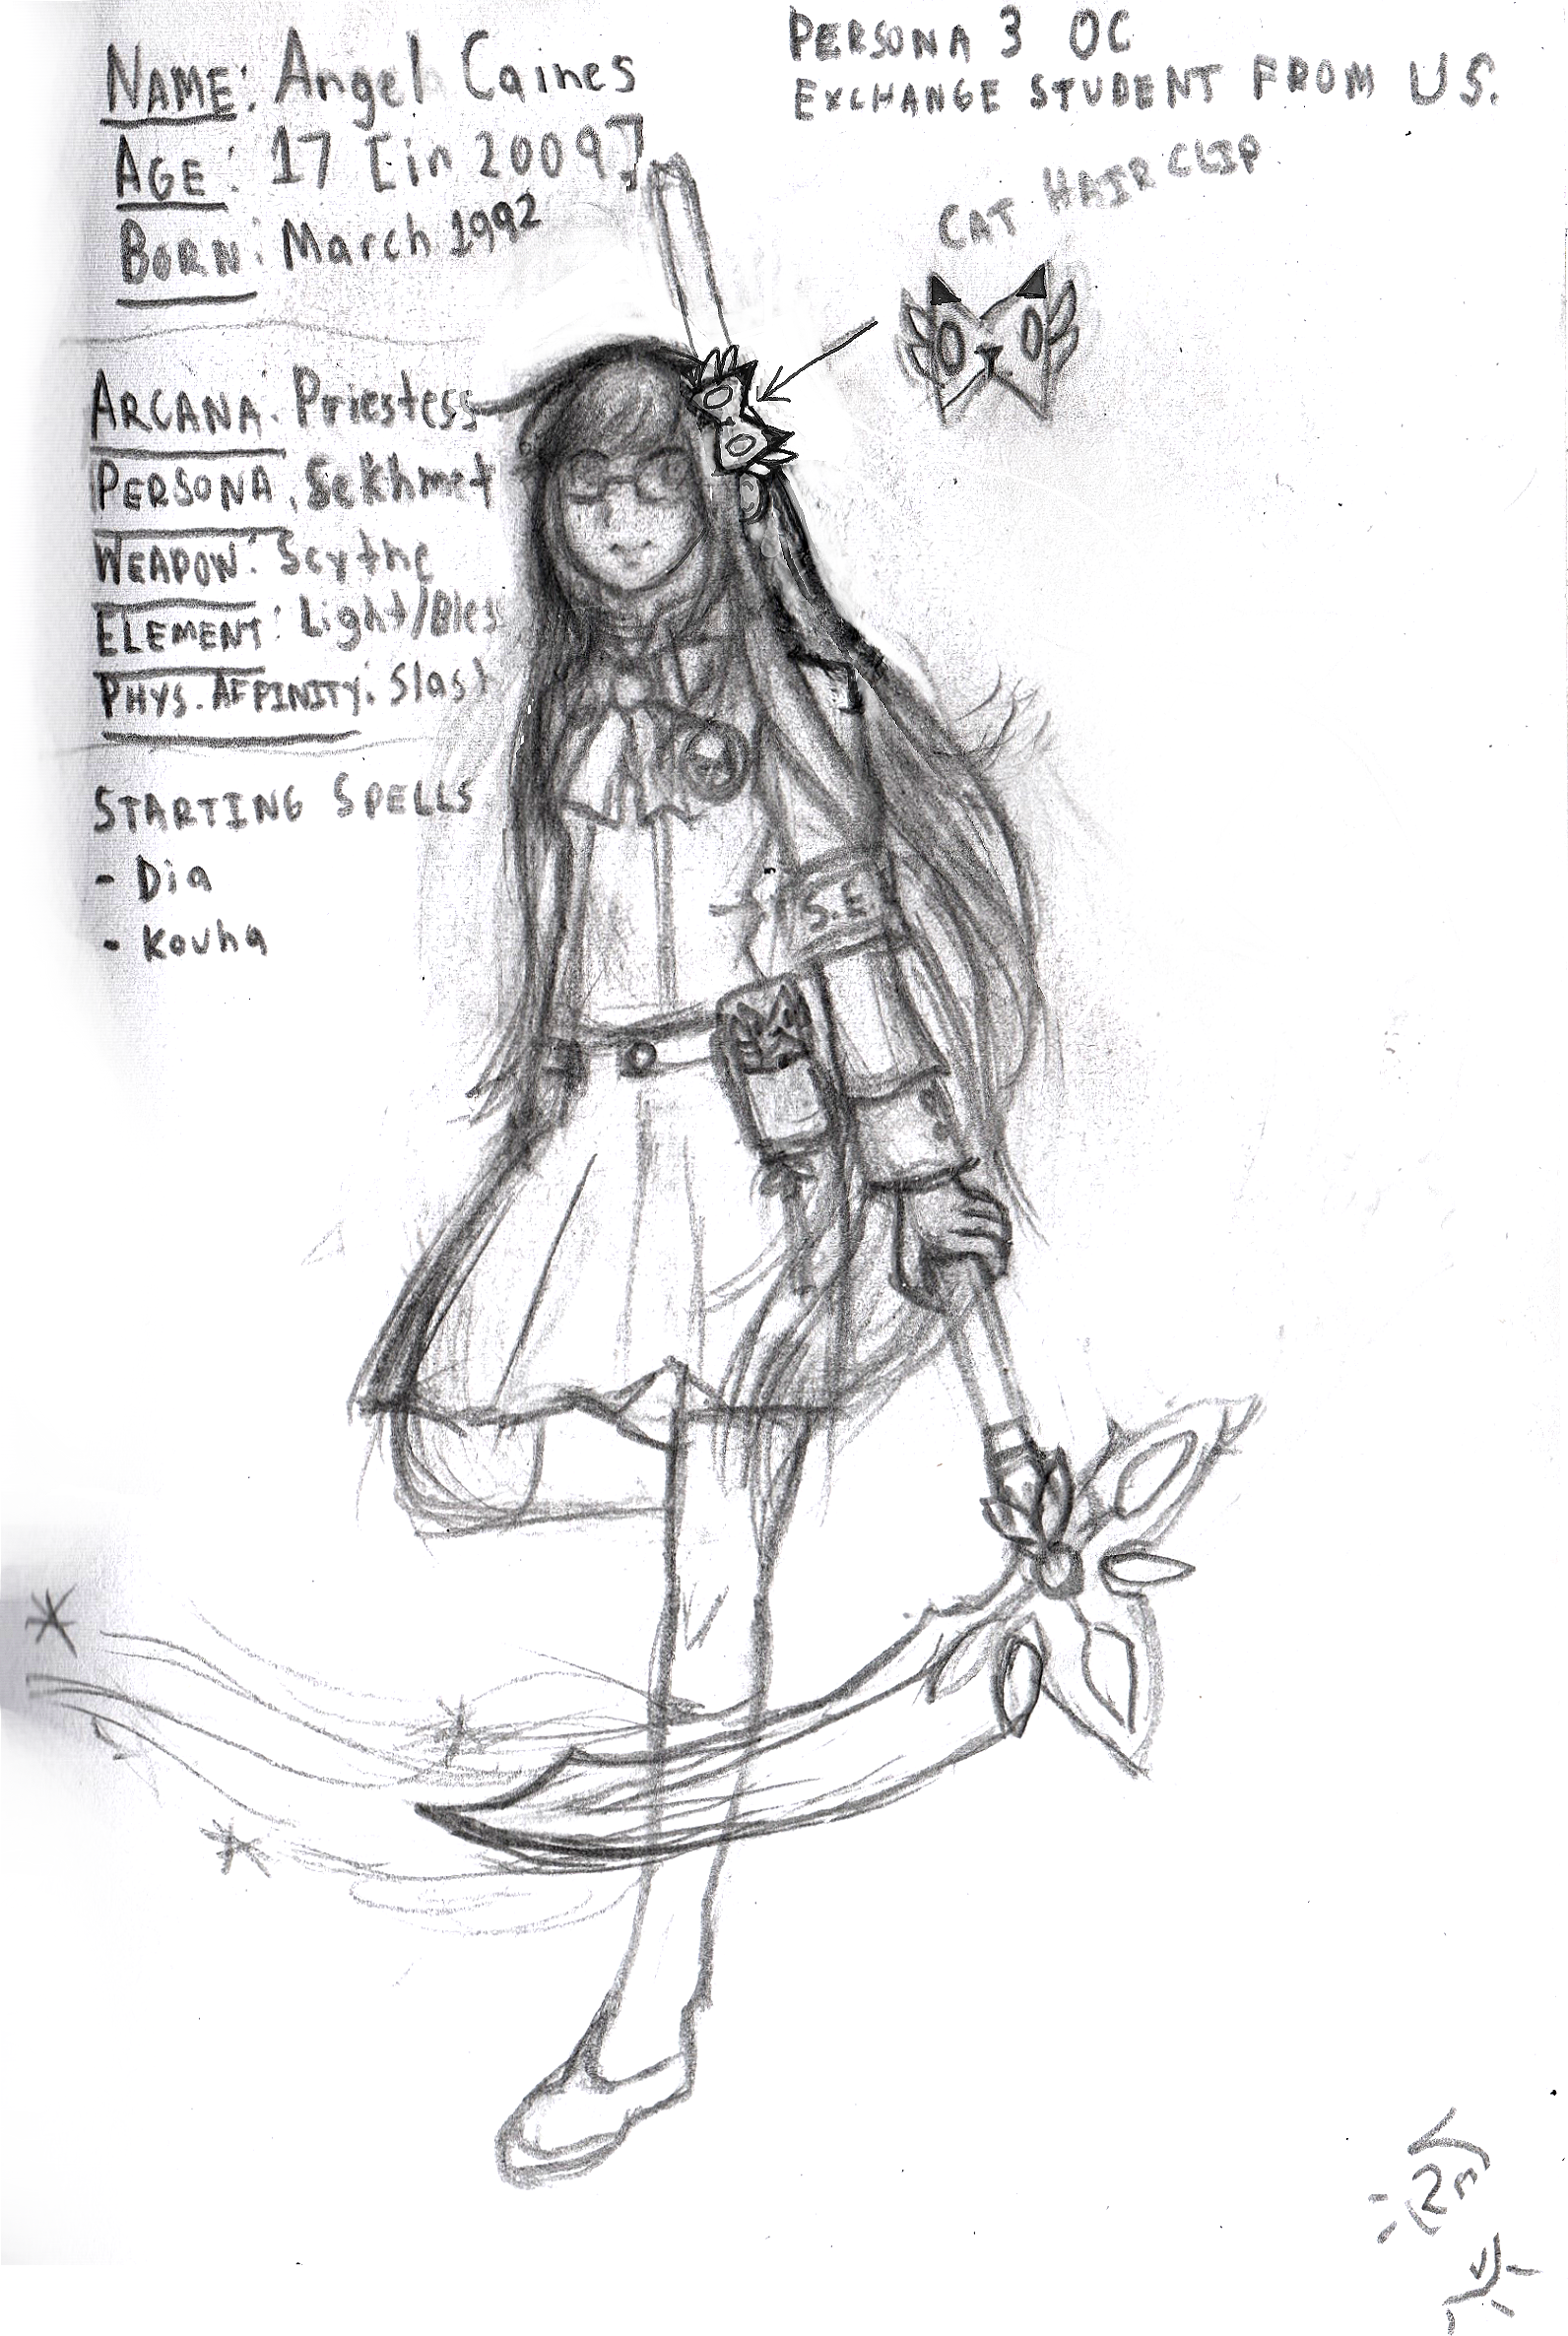 [ Concept ] Persona 3 Angel Caines Sketch.png